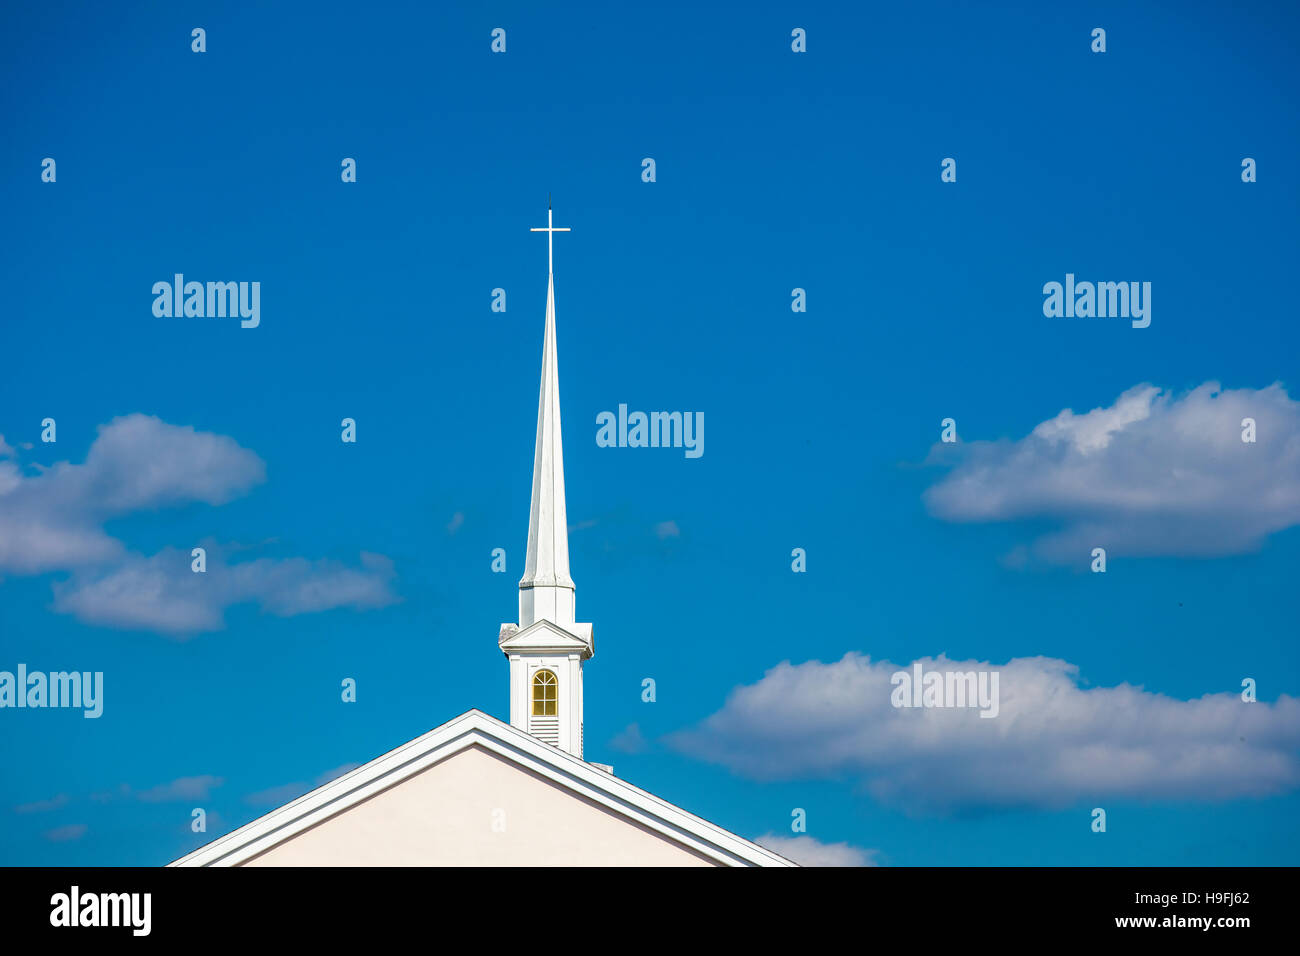 Tall white church steeple with cross on top against a blue sky in Punta Gorda Florida Stock Photo